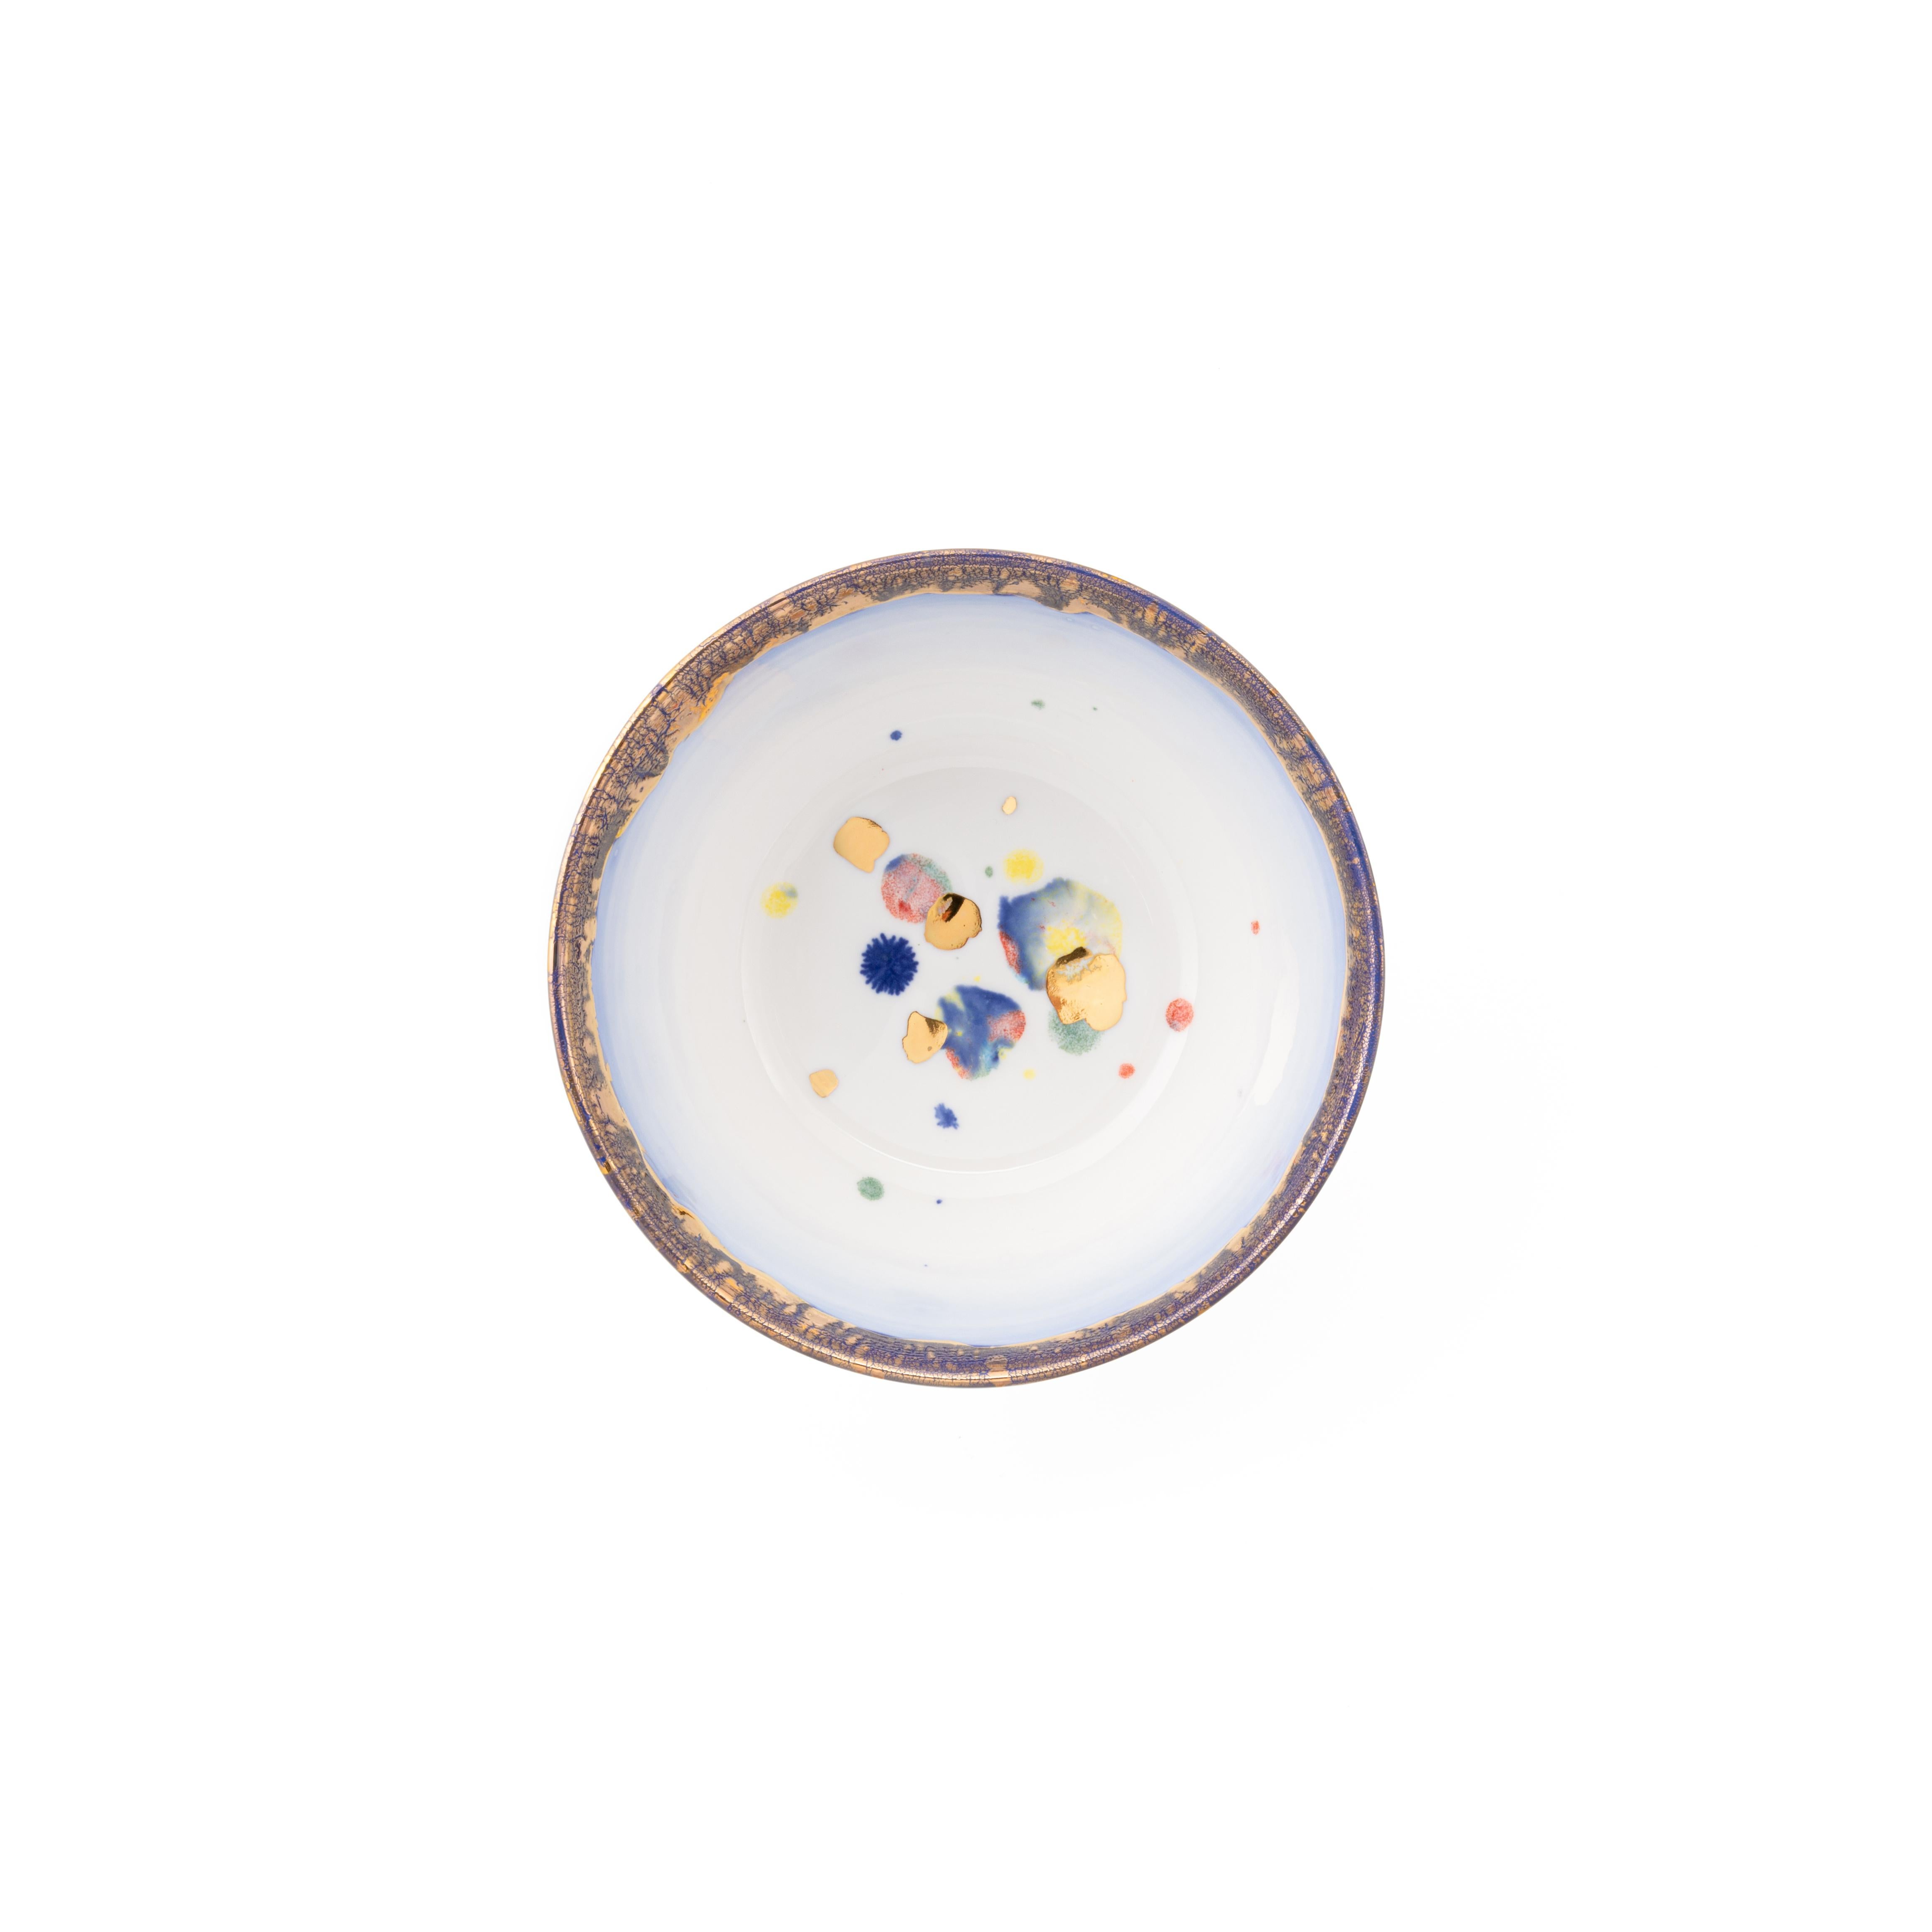 Handcrafted in Italy from the finest porcelain, this Apollo Bianco plate leads us into a magic world. Shades of blue lapis lazuli evoke the magic of oriental novellas. A fairytale is revealed by playful nuggets of gold, green red and blue drifting